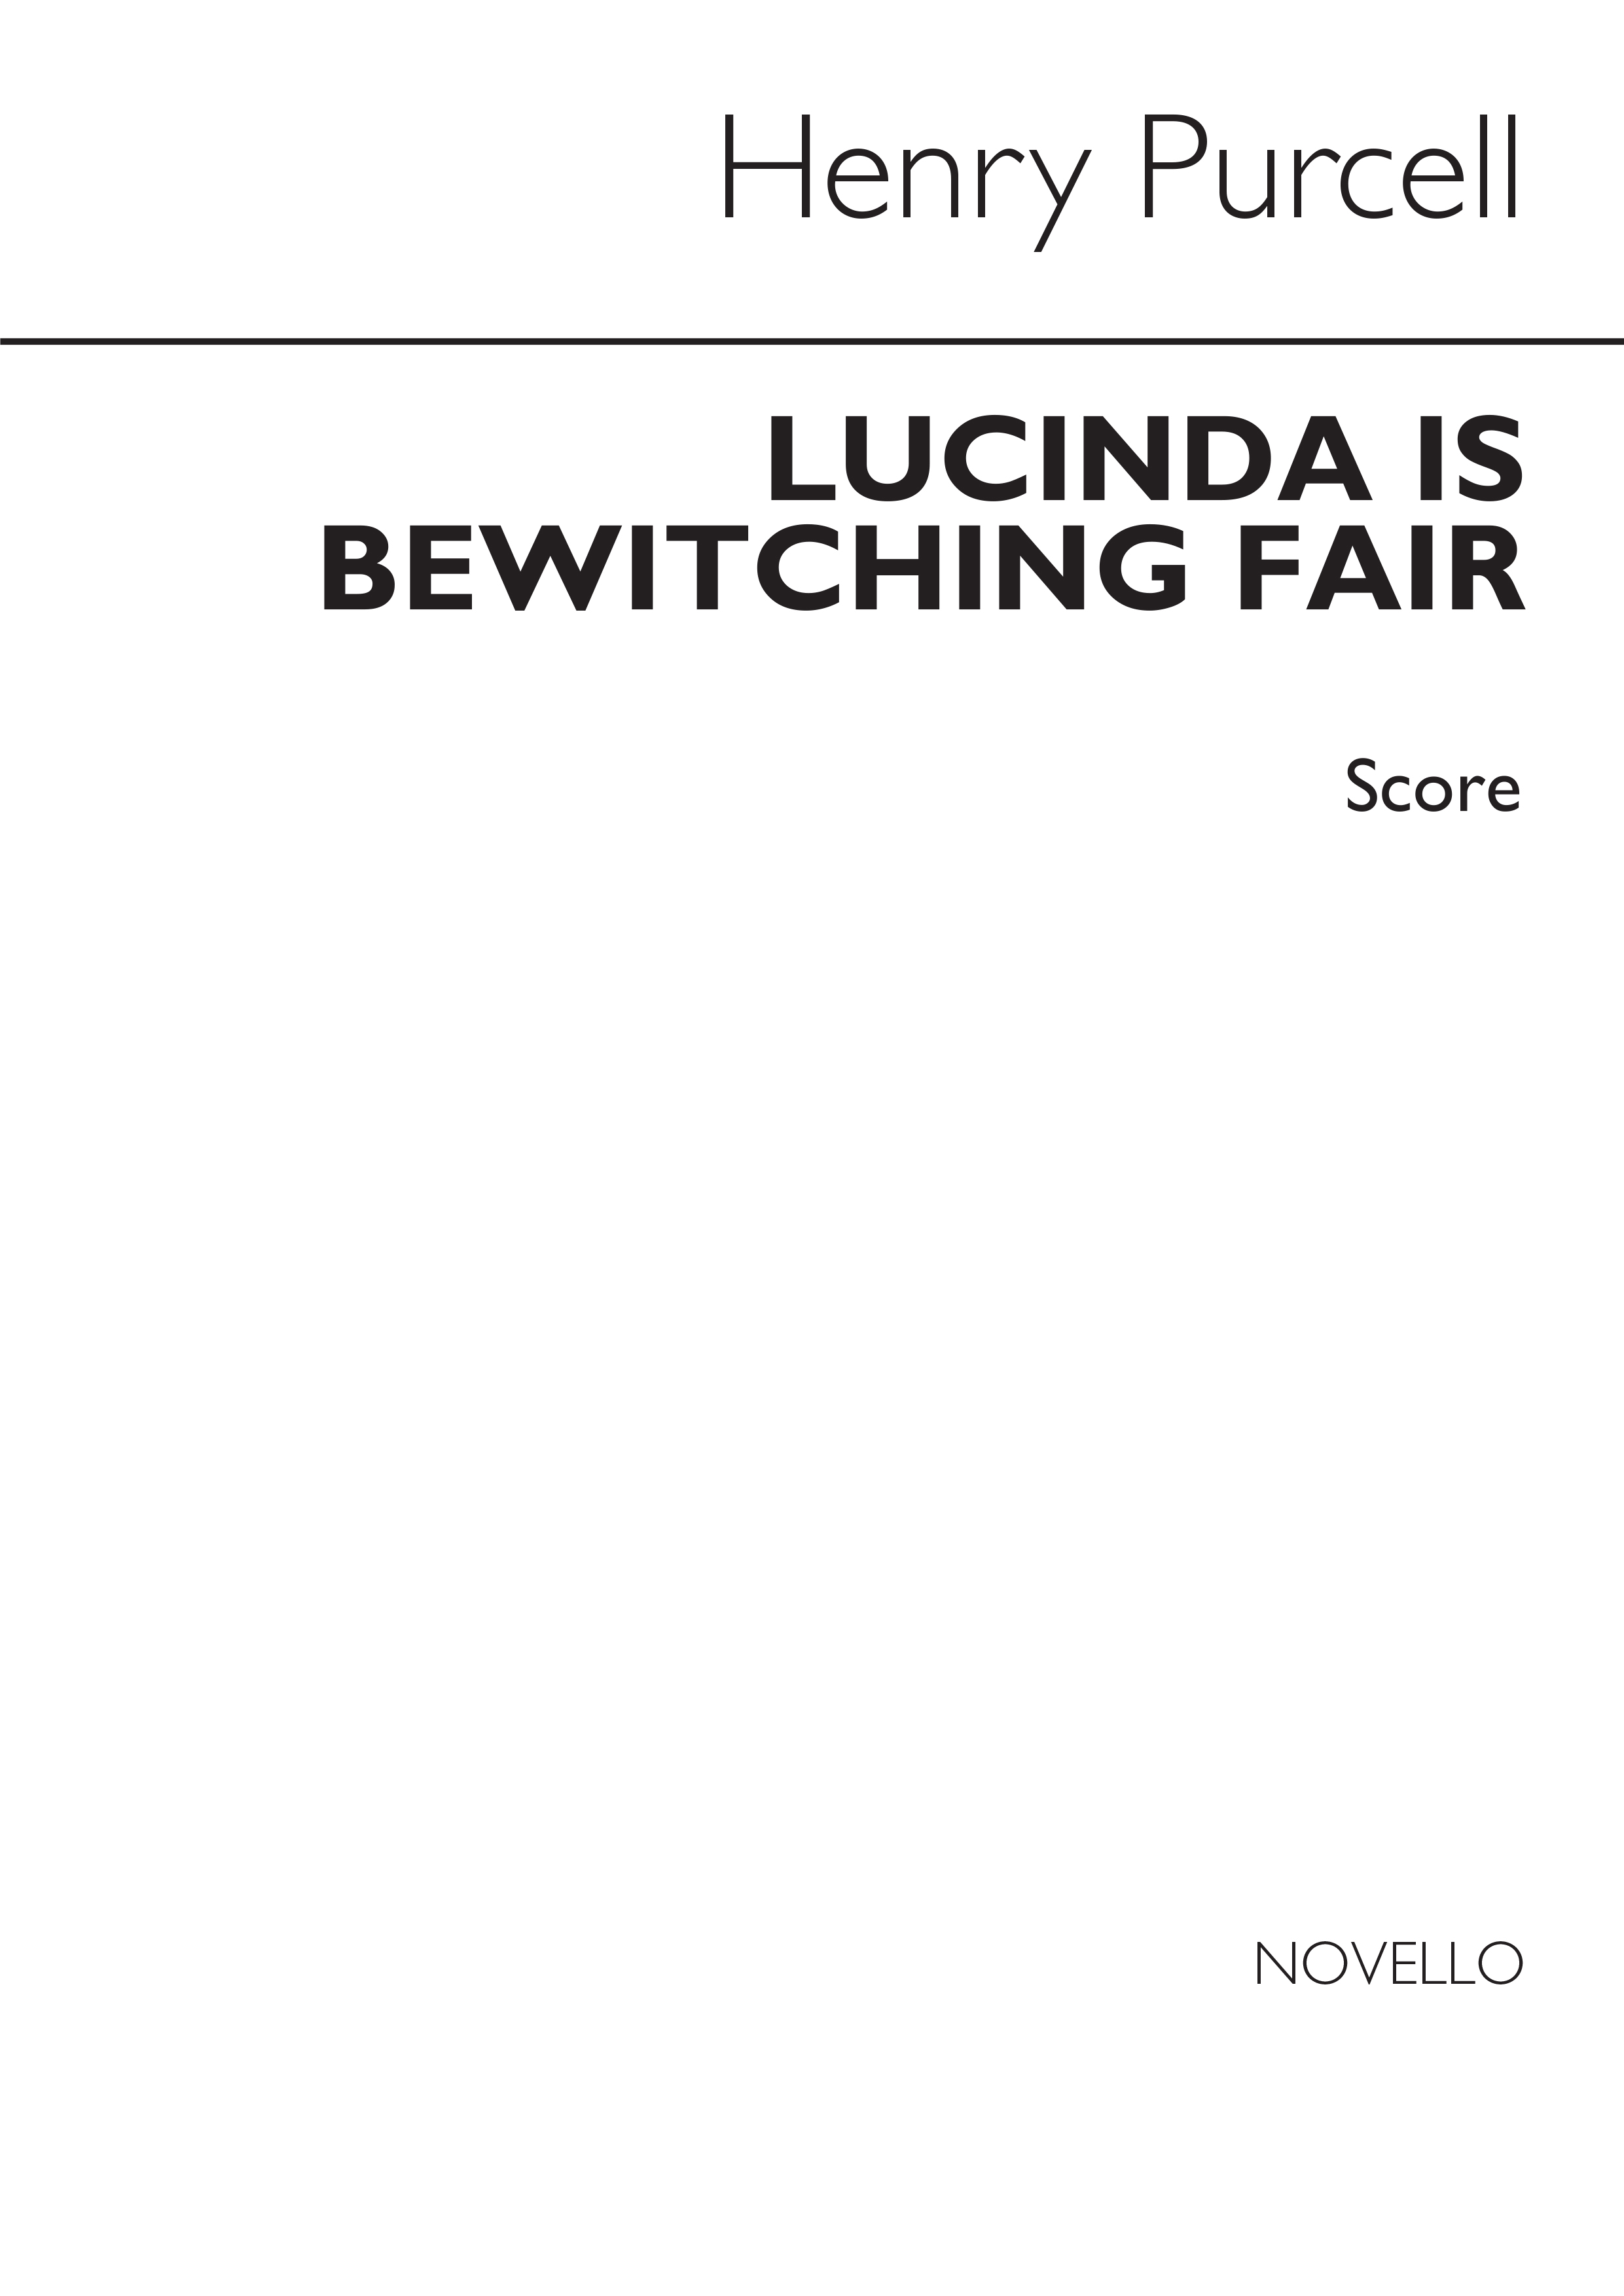 Henry Purcell: Lucinda Is Bewitching Fair (From Volume 16) Score: Score